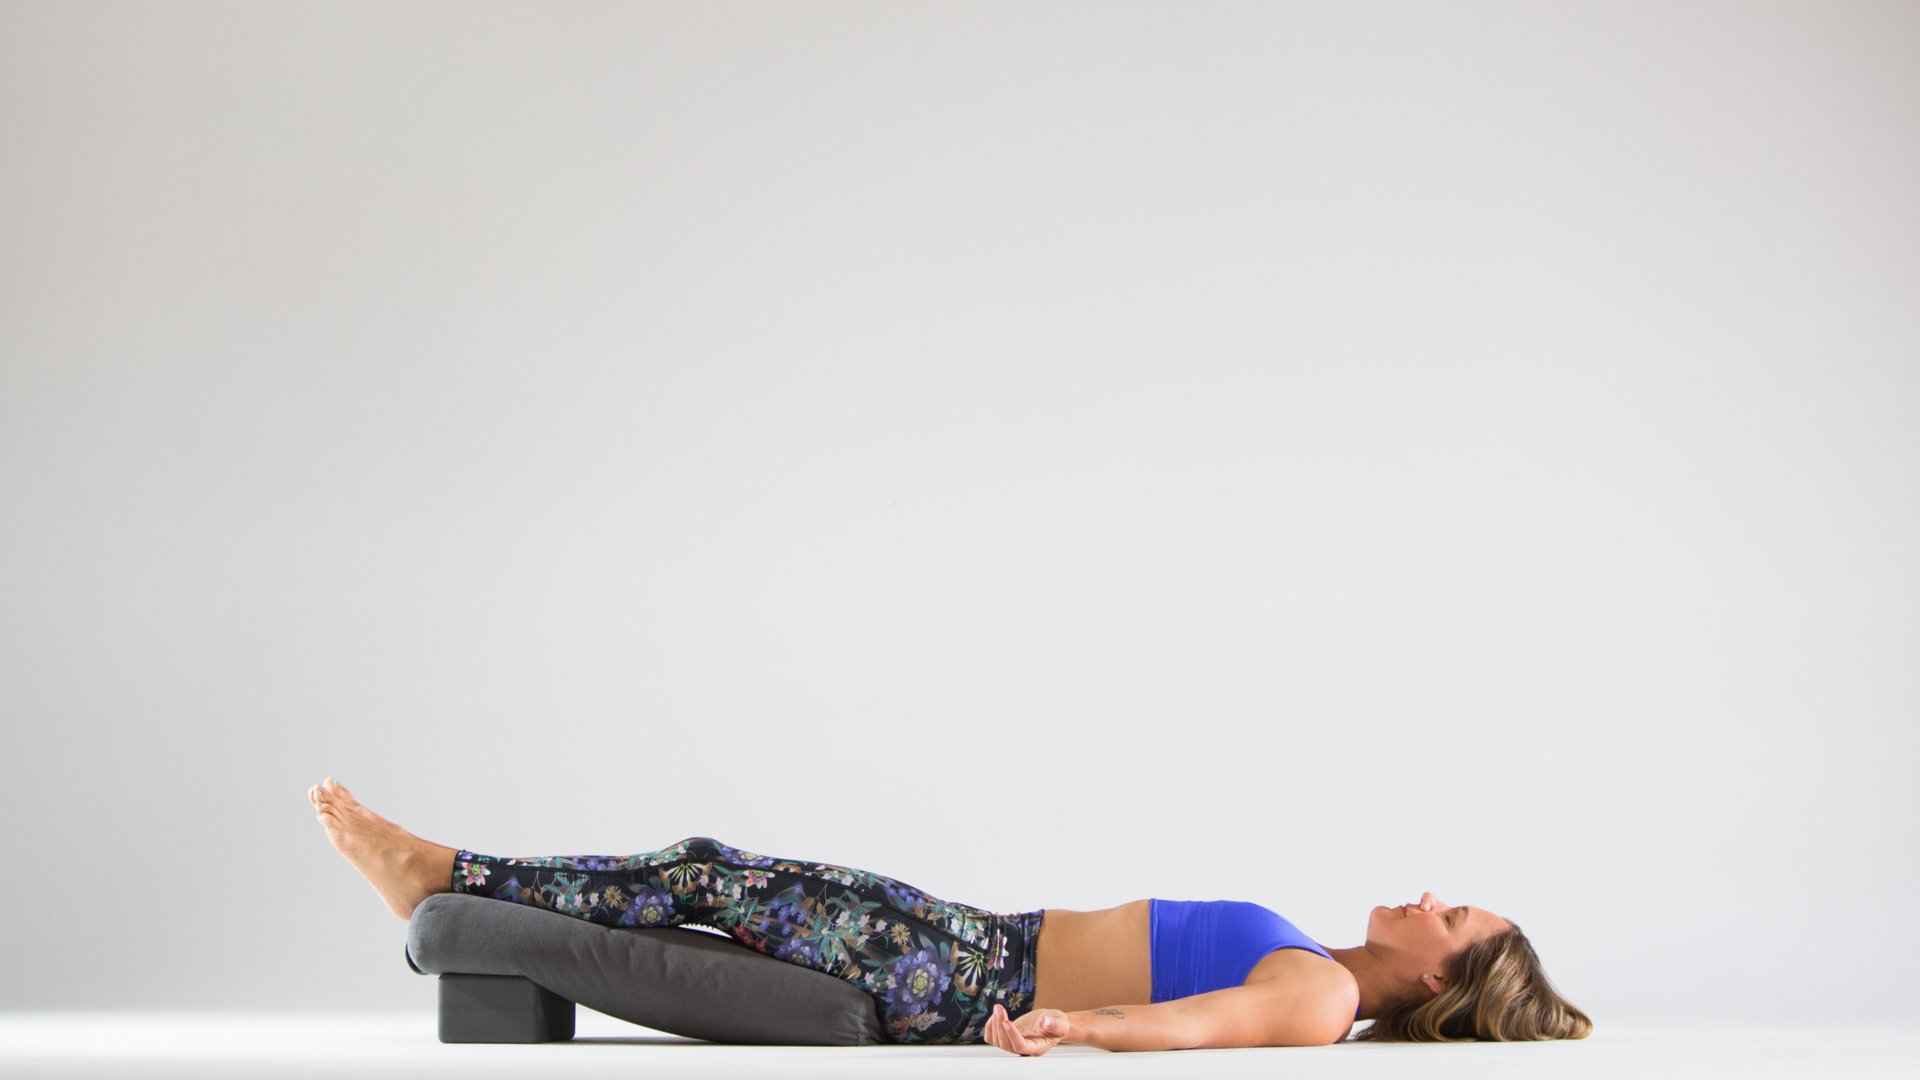 Take time for yourself with this restorative yoga practice